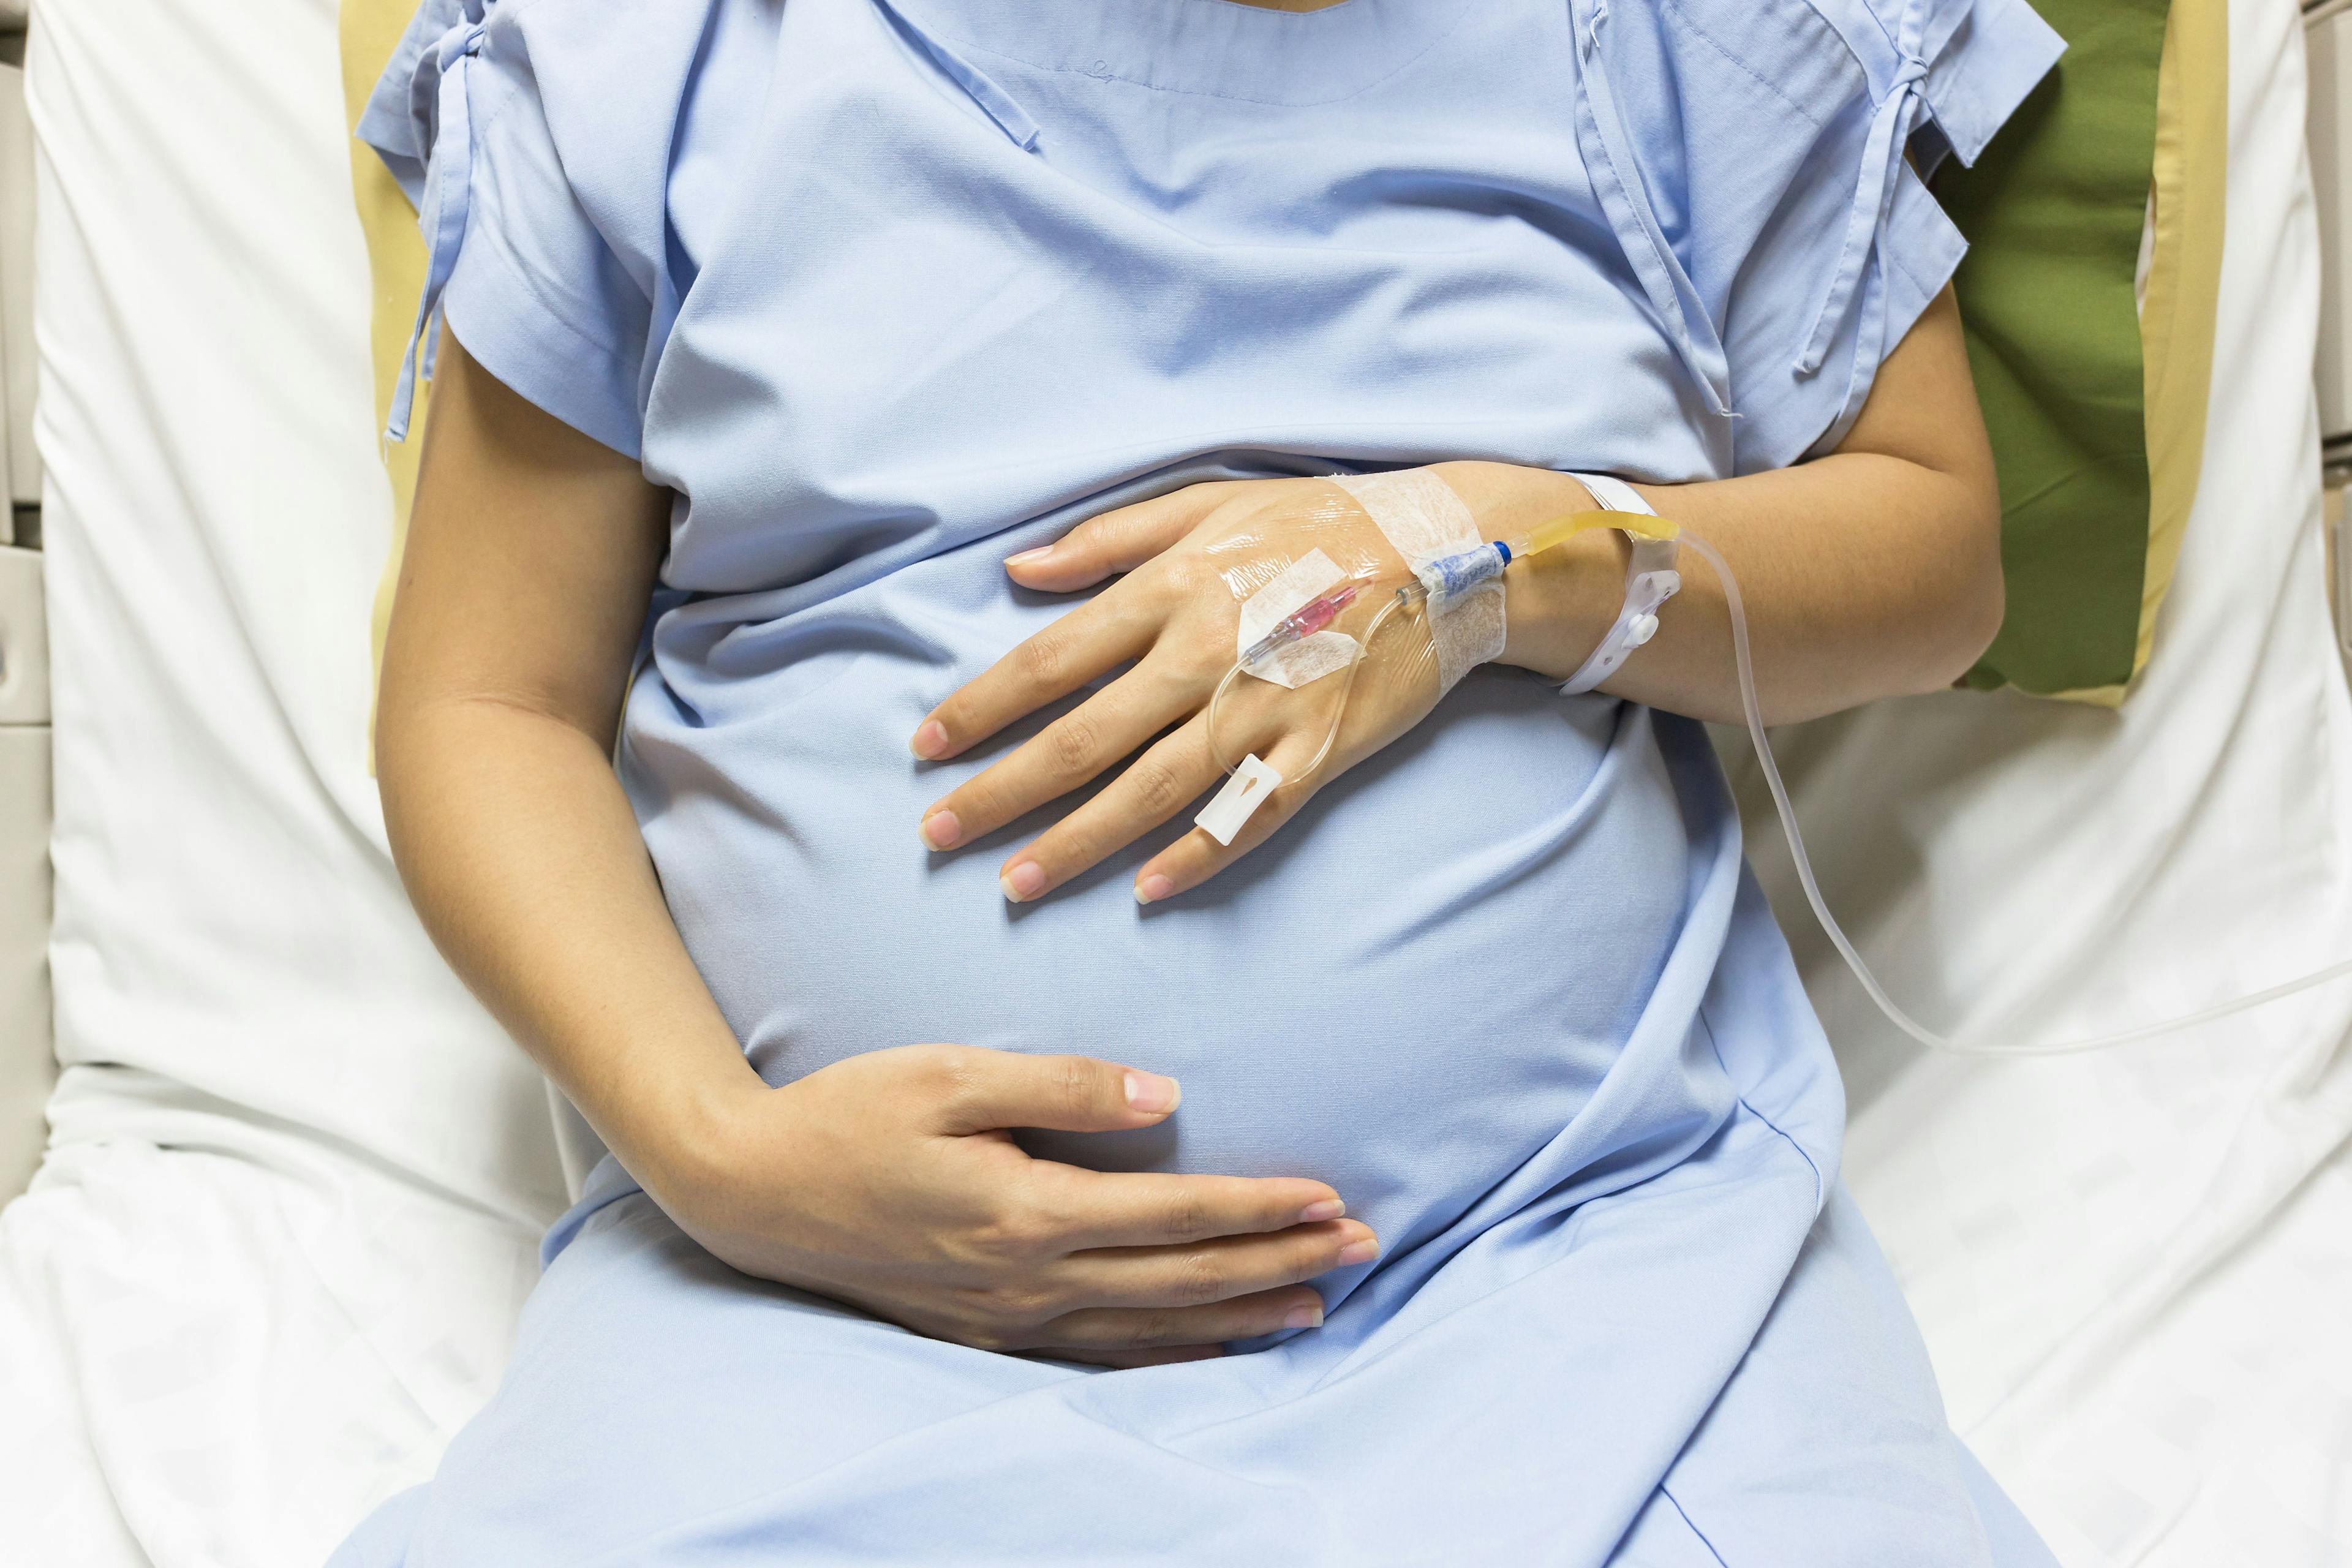 Depression, Anxiety Among Pregnant Women Linked to Higher Risk of C-Section